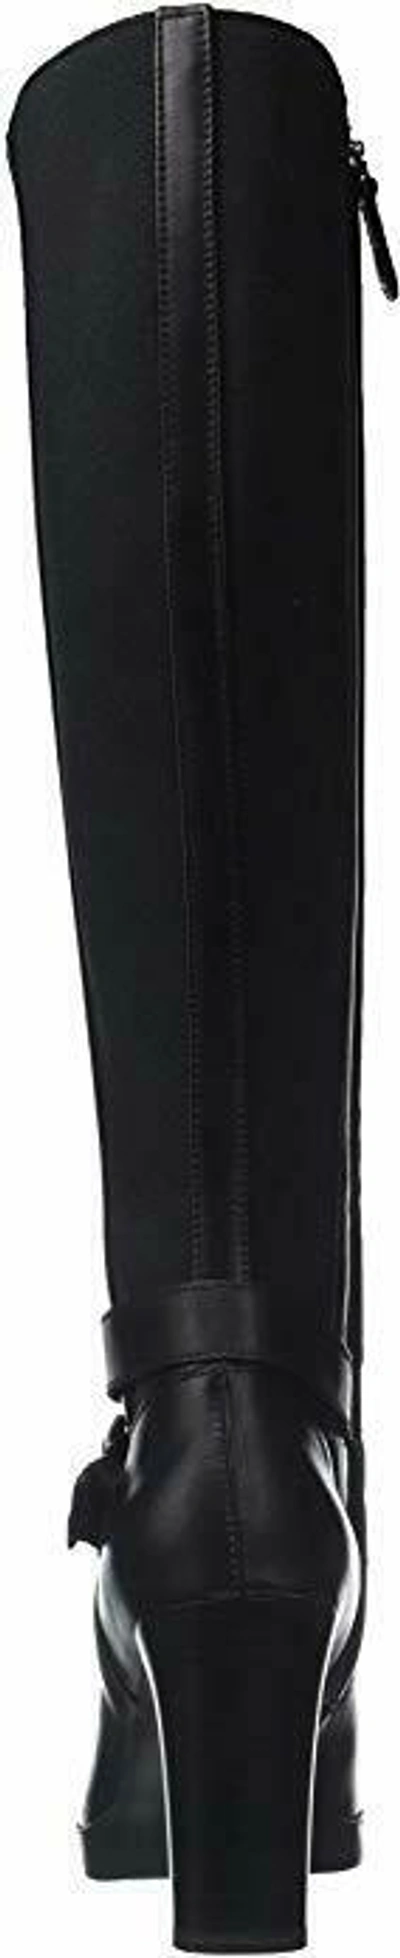 Pre-owned Geox £190 D Annya High F Black Knee High Heel Boots Real Leather  Size 3 | ModeSens